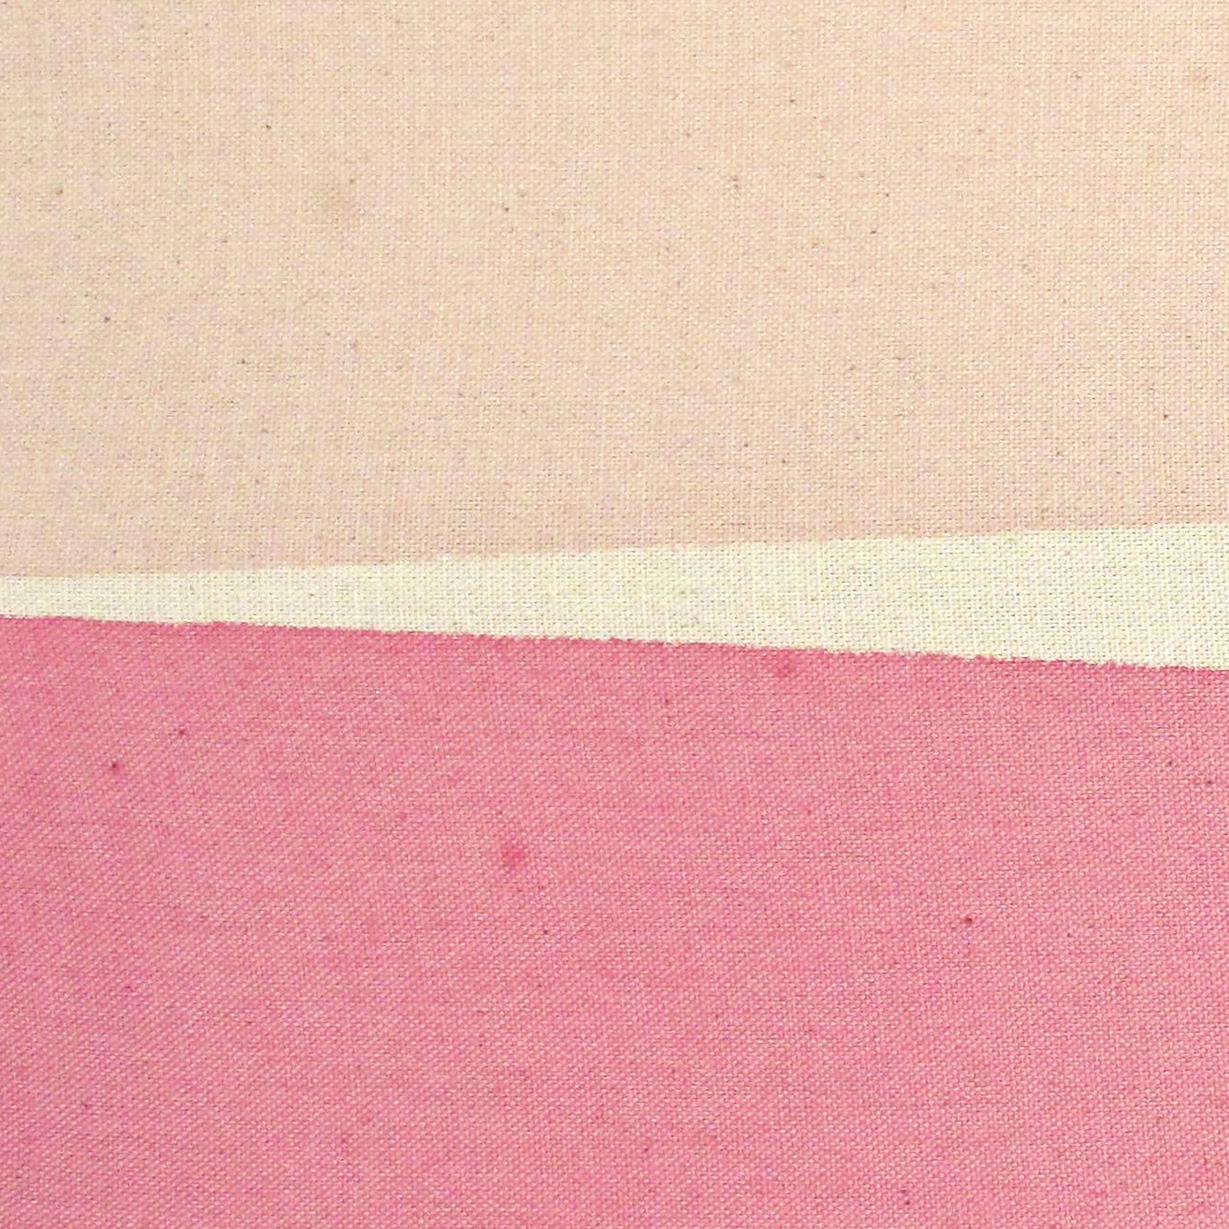 Ohne Titel Feb 0315 (Abstraktes Gemälde) (Pink), Abstract Painting, von Guillaume Moschini